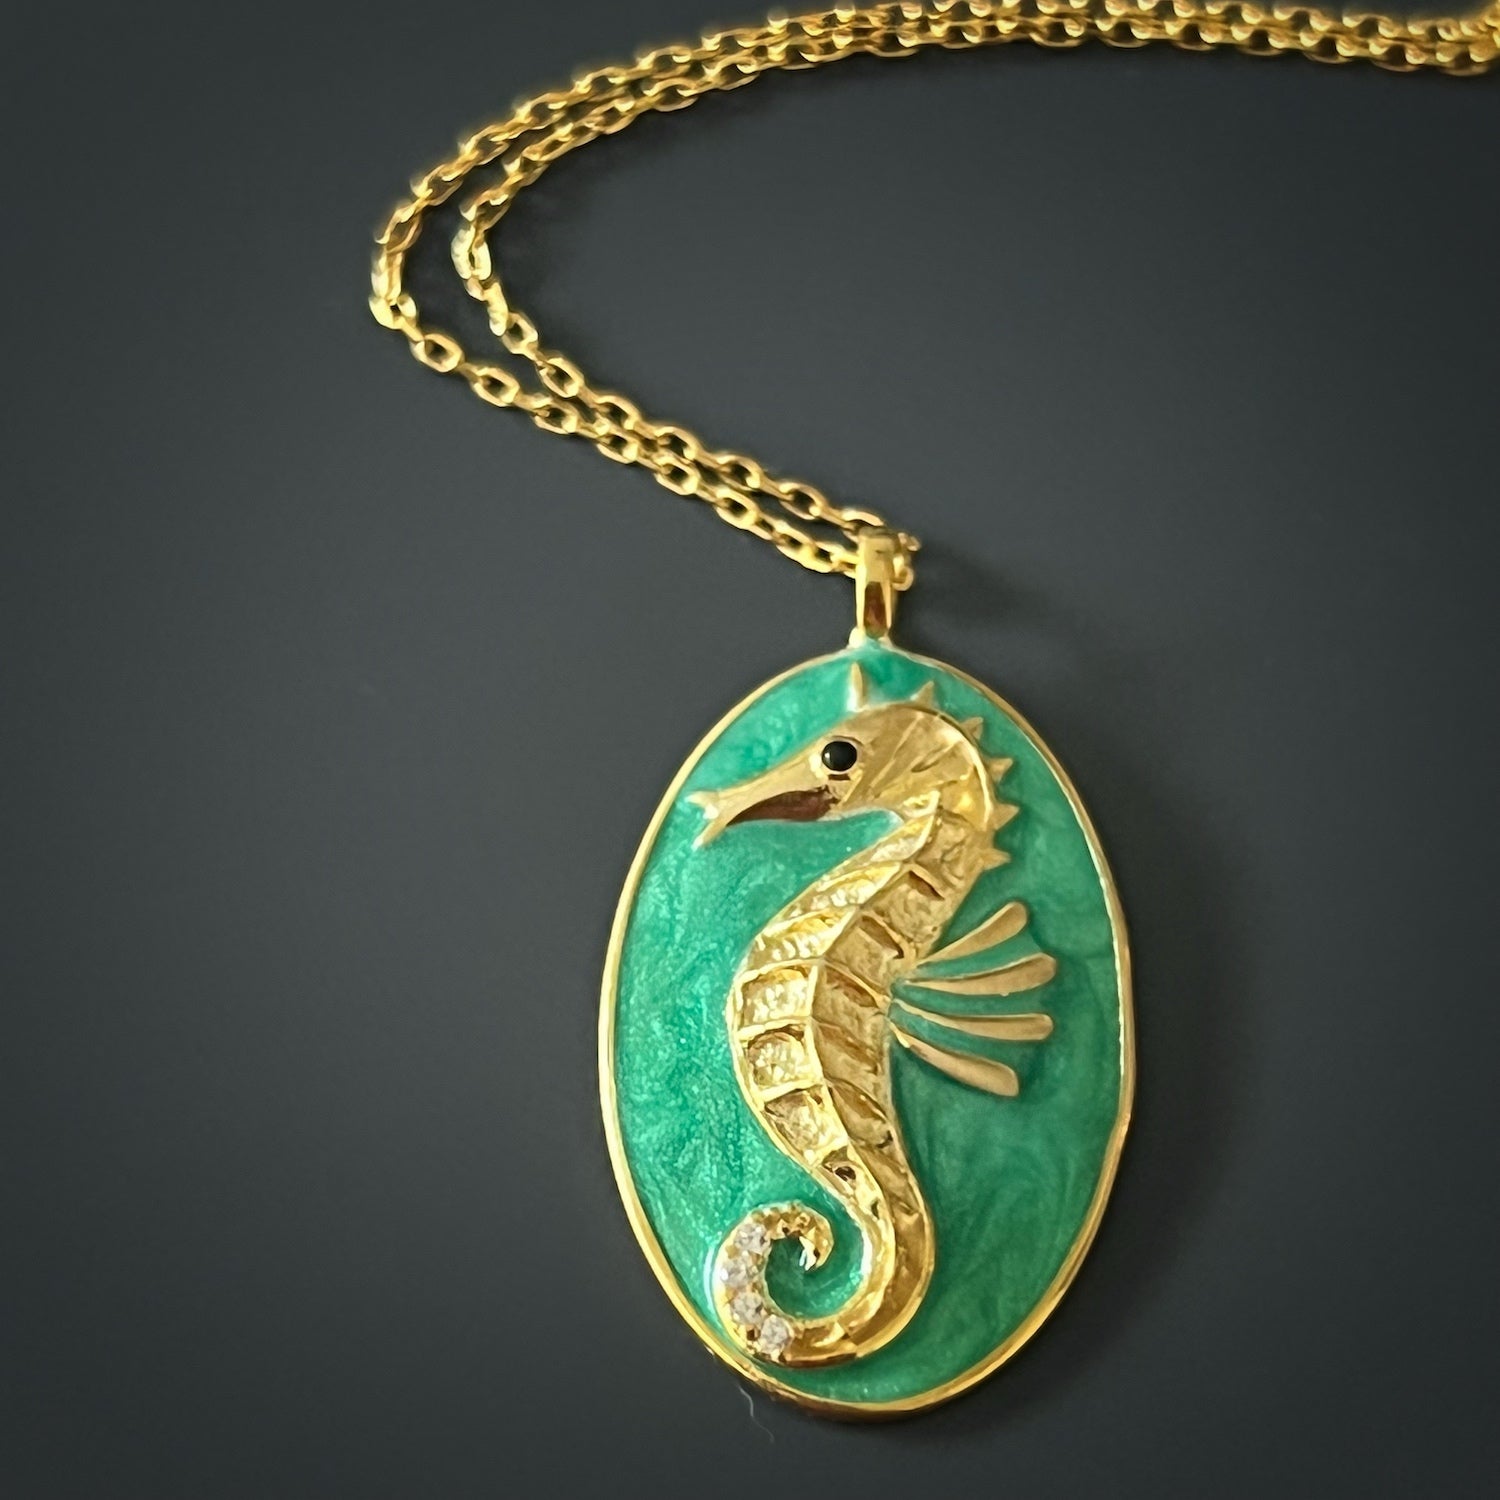 The Spirit Animal Green Seahorse Necklace, a versatile and eye-catching jewelry item that serves as a reminder of the wearer's inner qualities.